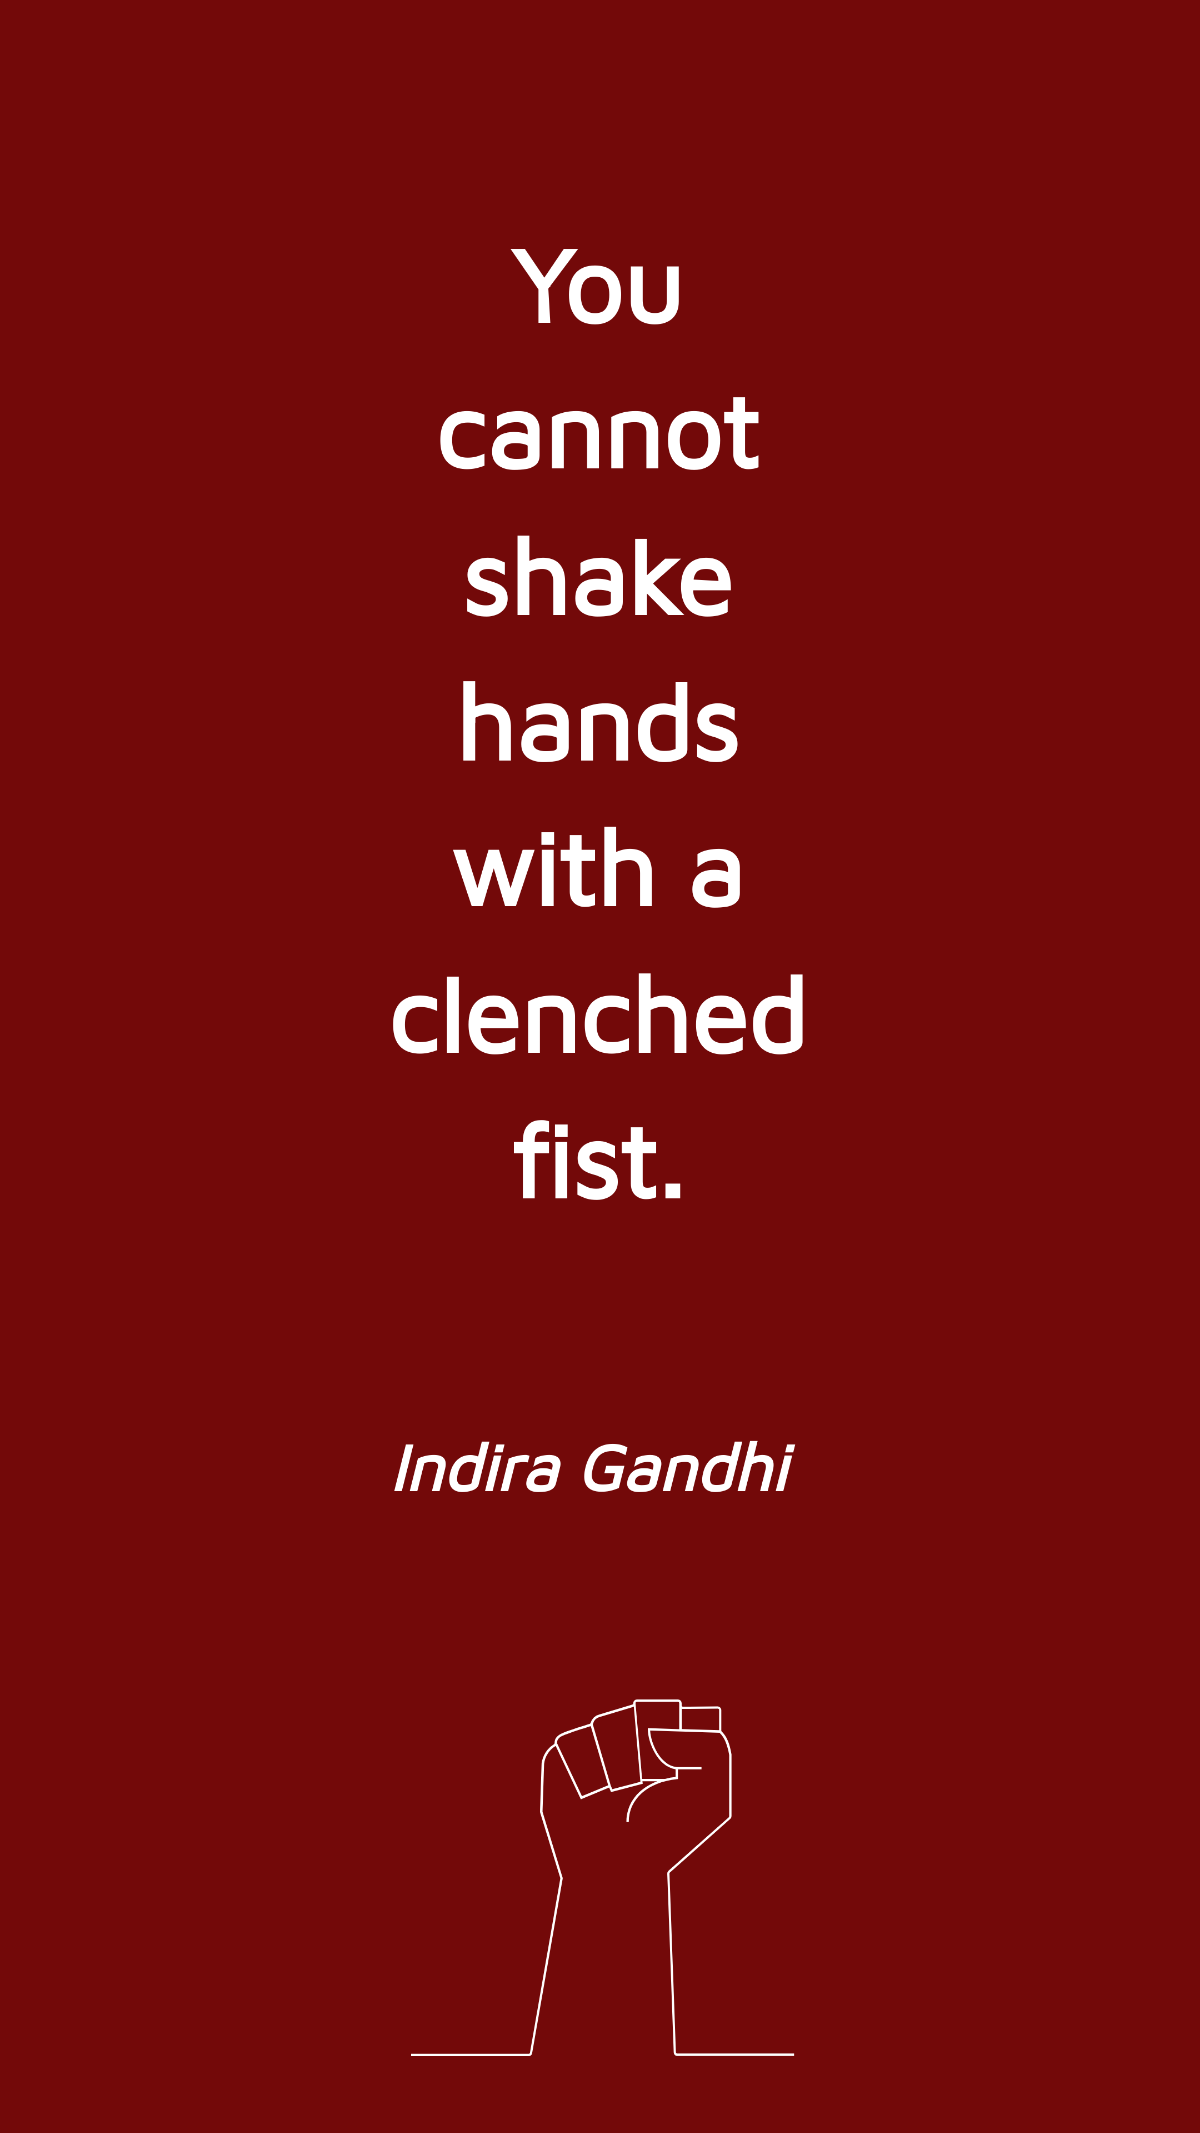 Free Indira Gandhi - You cannot shake hands with a clenched fist. Template